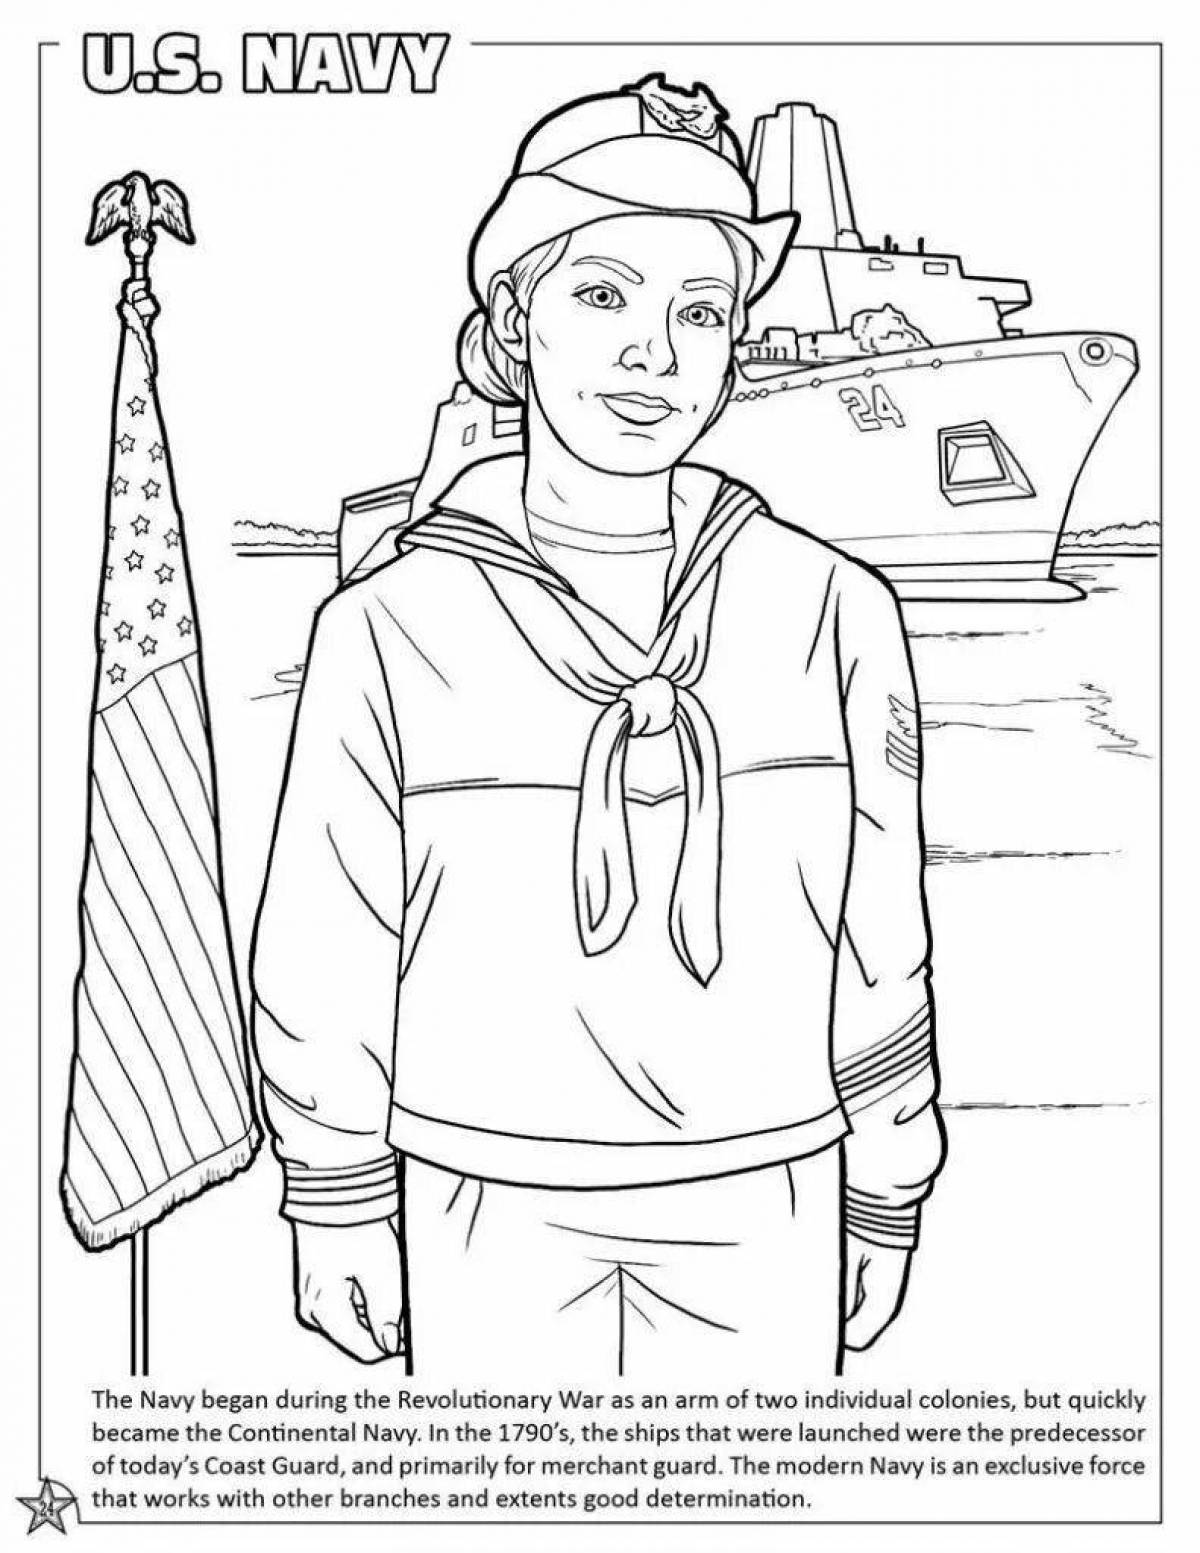 Bright coloring book about the military profession for children 3-4 years old